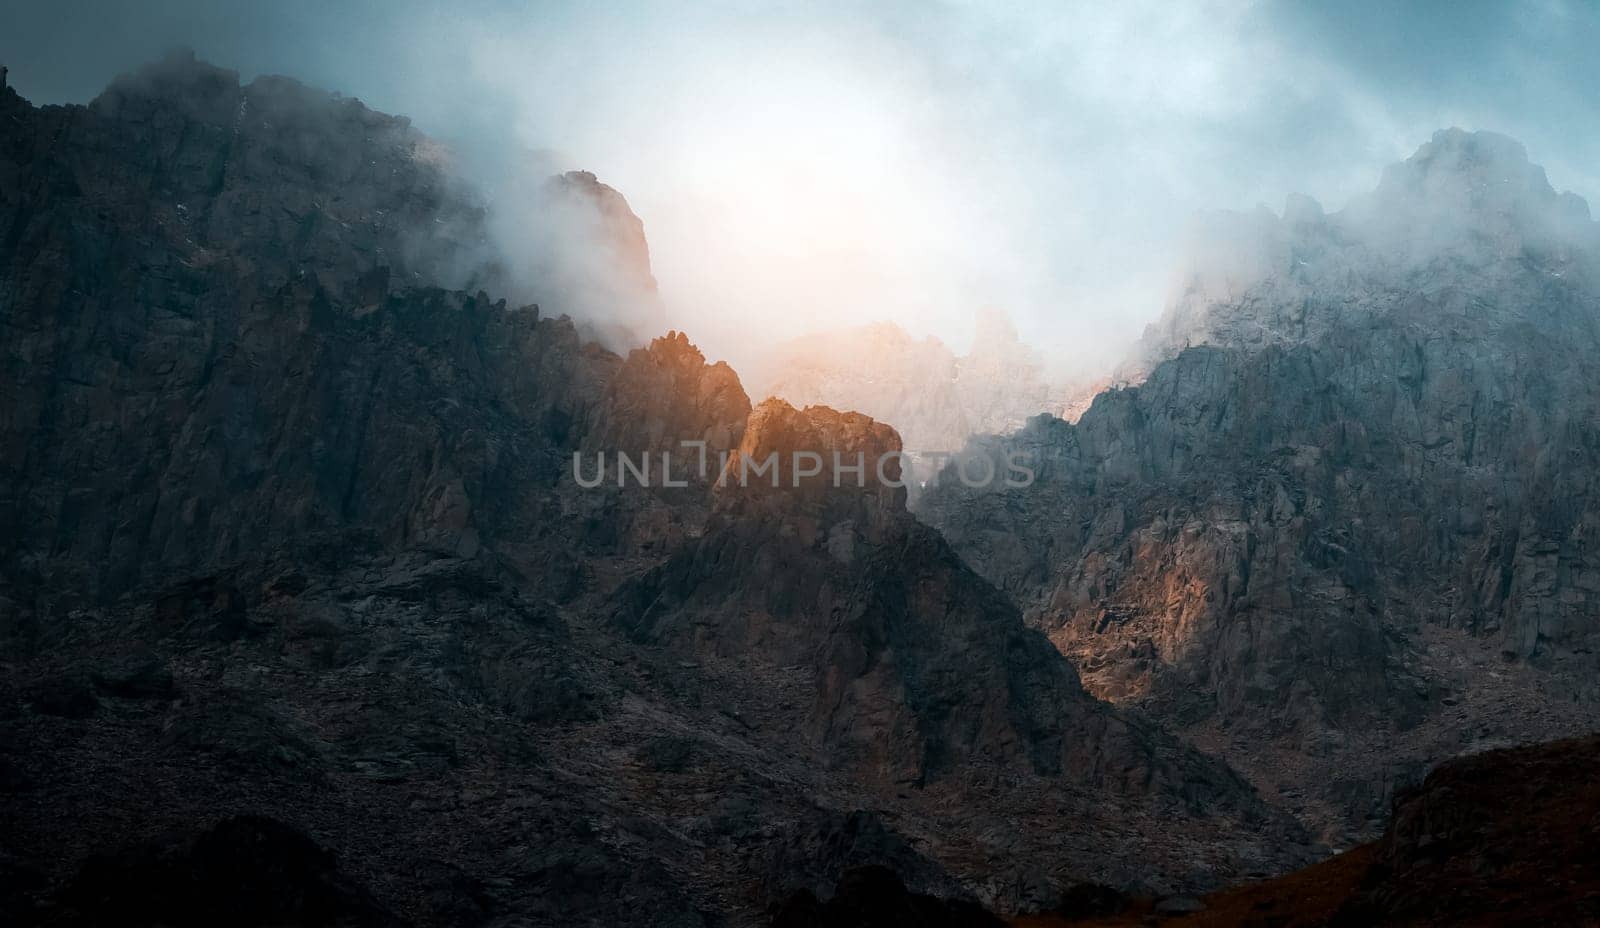 Thunder warning in the mountains, picturesque majestic rocky mountains scenery with an impending storm and the last light of the sun at sunset, wild nature without people.